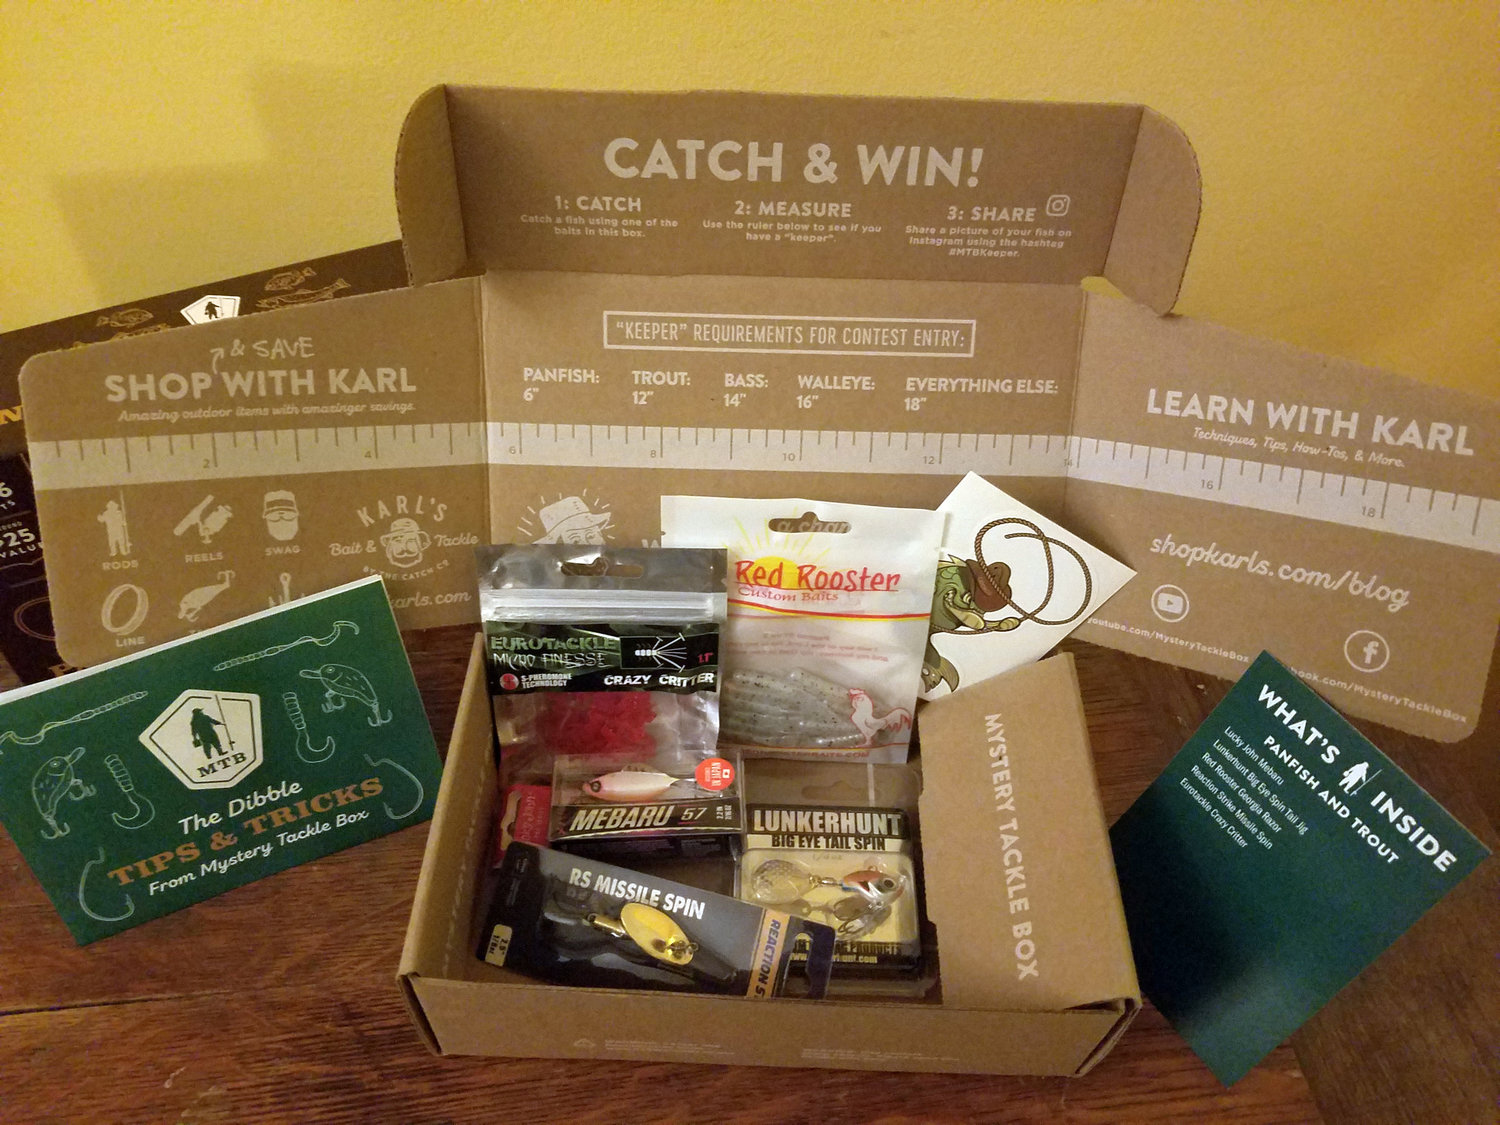 You can quickly collect lots of interesting tackle from a subscription box service.